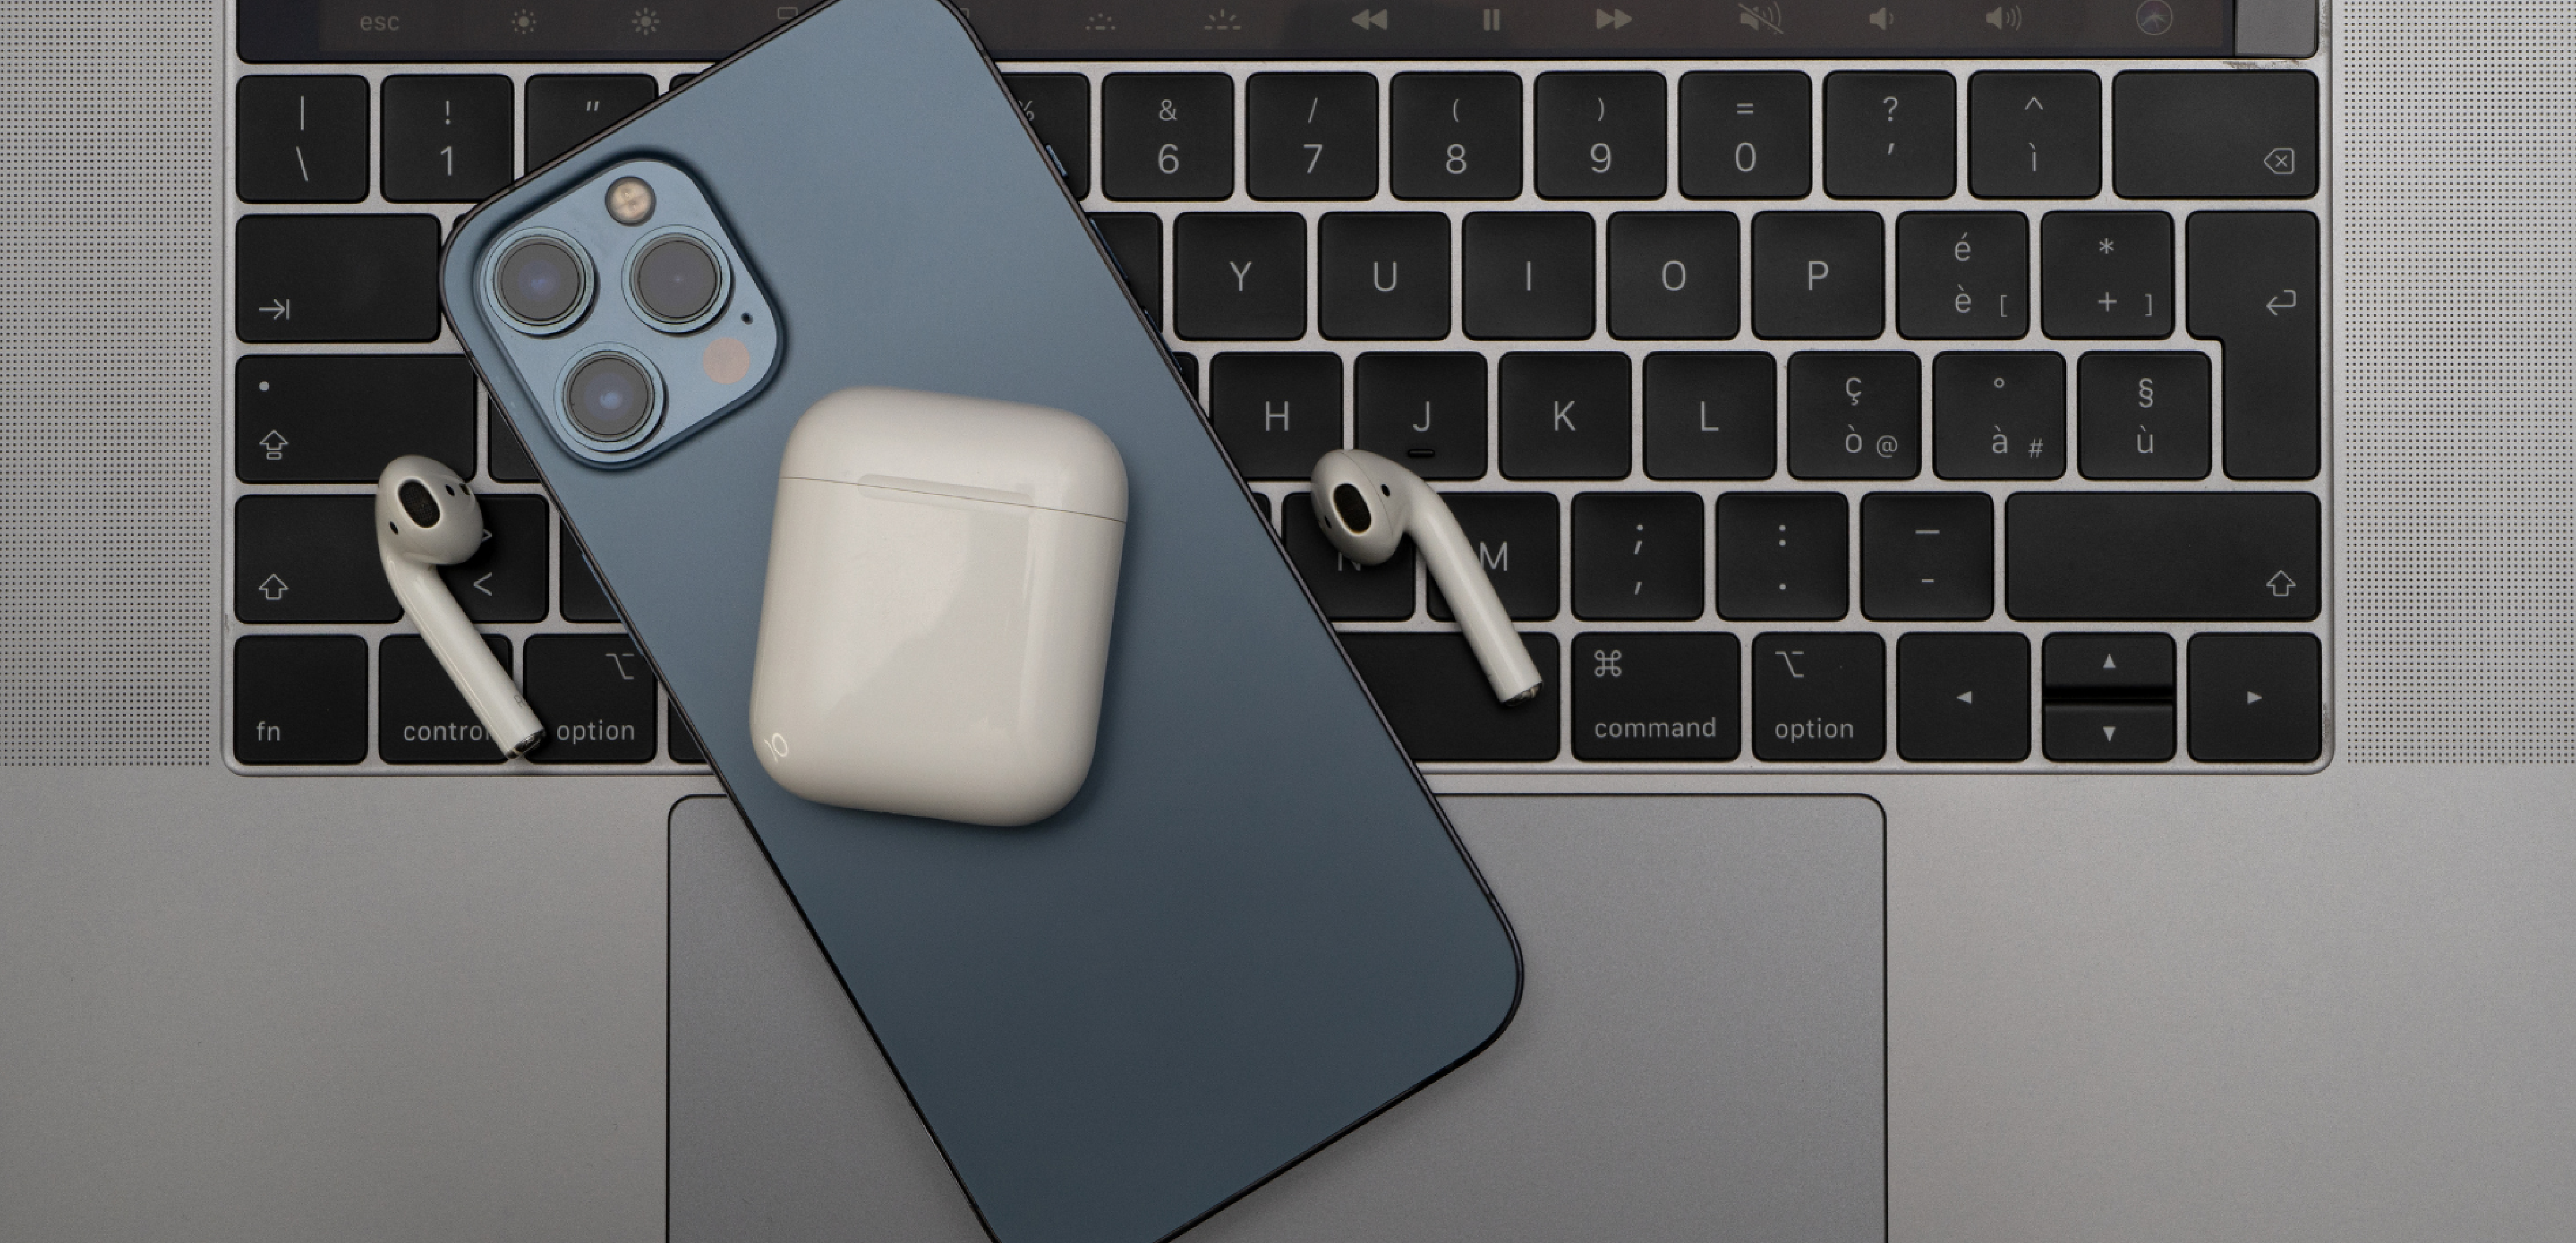 Photo of a MacBook keyboard with a navy blue iPhone and AirPods resting on top of it